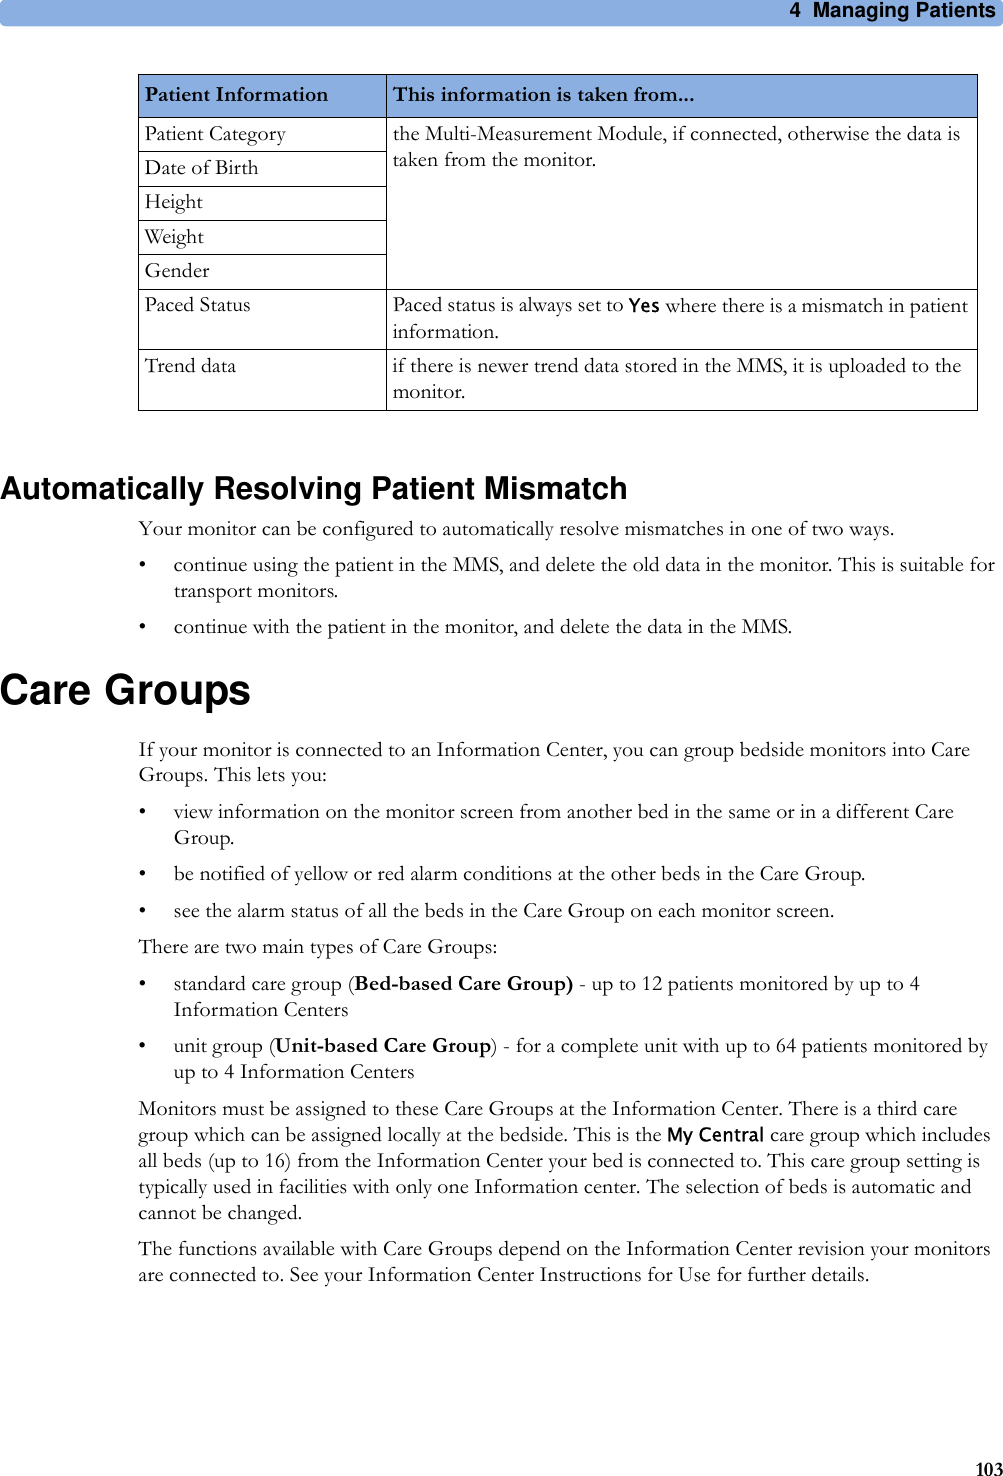 4 Managing Patients103Automatically Resolving Patient MismatchYour monitor can be configured to automatically resolve mismatches in one of two ways.• continue using the patient in the MMS, and delete the old data in the monitor. This is suitable for transport monitors.• continue with the patient in the monitor, and delete the data in the MMS.Care GroupsIf your monitor is connected to an Information Center, you can group bedside monitors into Care Groups. This lets you:• view information on the monitor screen from another bed in the same or in a different Care Group.• be notified of yellow or red alarm conditions at the other beds in the Care Group.• see the alarm status of all the beds in the Care Group on each monitor screen.There are two main types of Care Groups:• standard care group (Bed-based Care Group) - up to 12 patients monitored by up to 4 Information Centers• unit group (Unit-based Care Group) - for a complete unit with up to 64 patients monitored by up to 4 Information CentersMonitors must be assigned to these Care Groups at the Information Center. There is a third care group which can be assigned locally at the bedside. This is the My Central care group which includes all beds (up to 16) from the Information Center your bed is connected to. This care group setting is typically used in facilities with only one Information center. The selection of beds is automatic and cannot be changed.The functions available with Care Groups depend on the Information Center revision your monitors are connected to. See your Information Center Instructions for Use for further details.Patient Category the Multi-Measurement Module, if connected, otherwise the data is taken from the monitor.Date of BirthHeightWeightGenderPaced Status Paced status is always set to Yes where there is a mismatch in patient information.Trend data if there is newer trend data stored in the MMS, it is uploaded to the monitor.Patient Information This information is taken from...